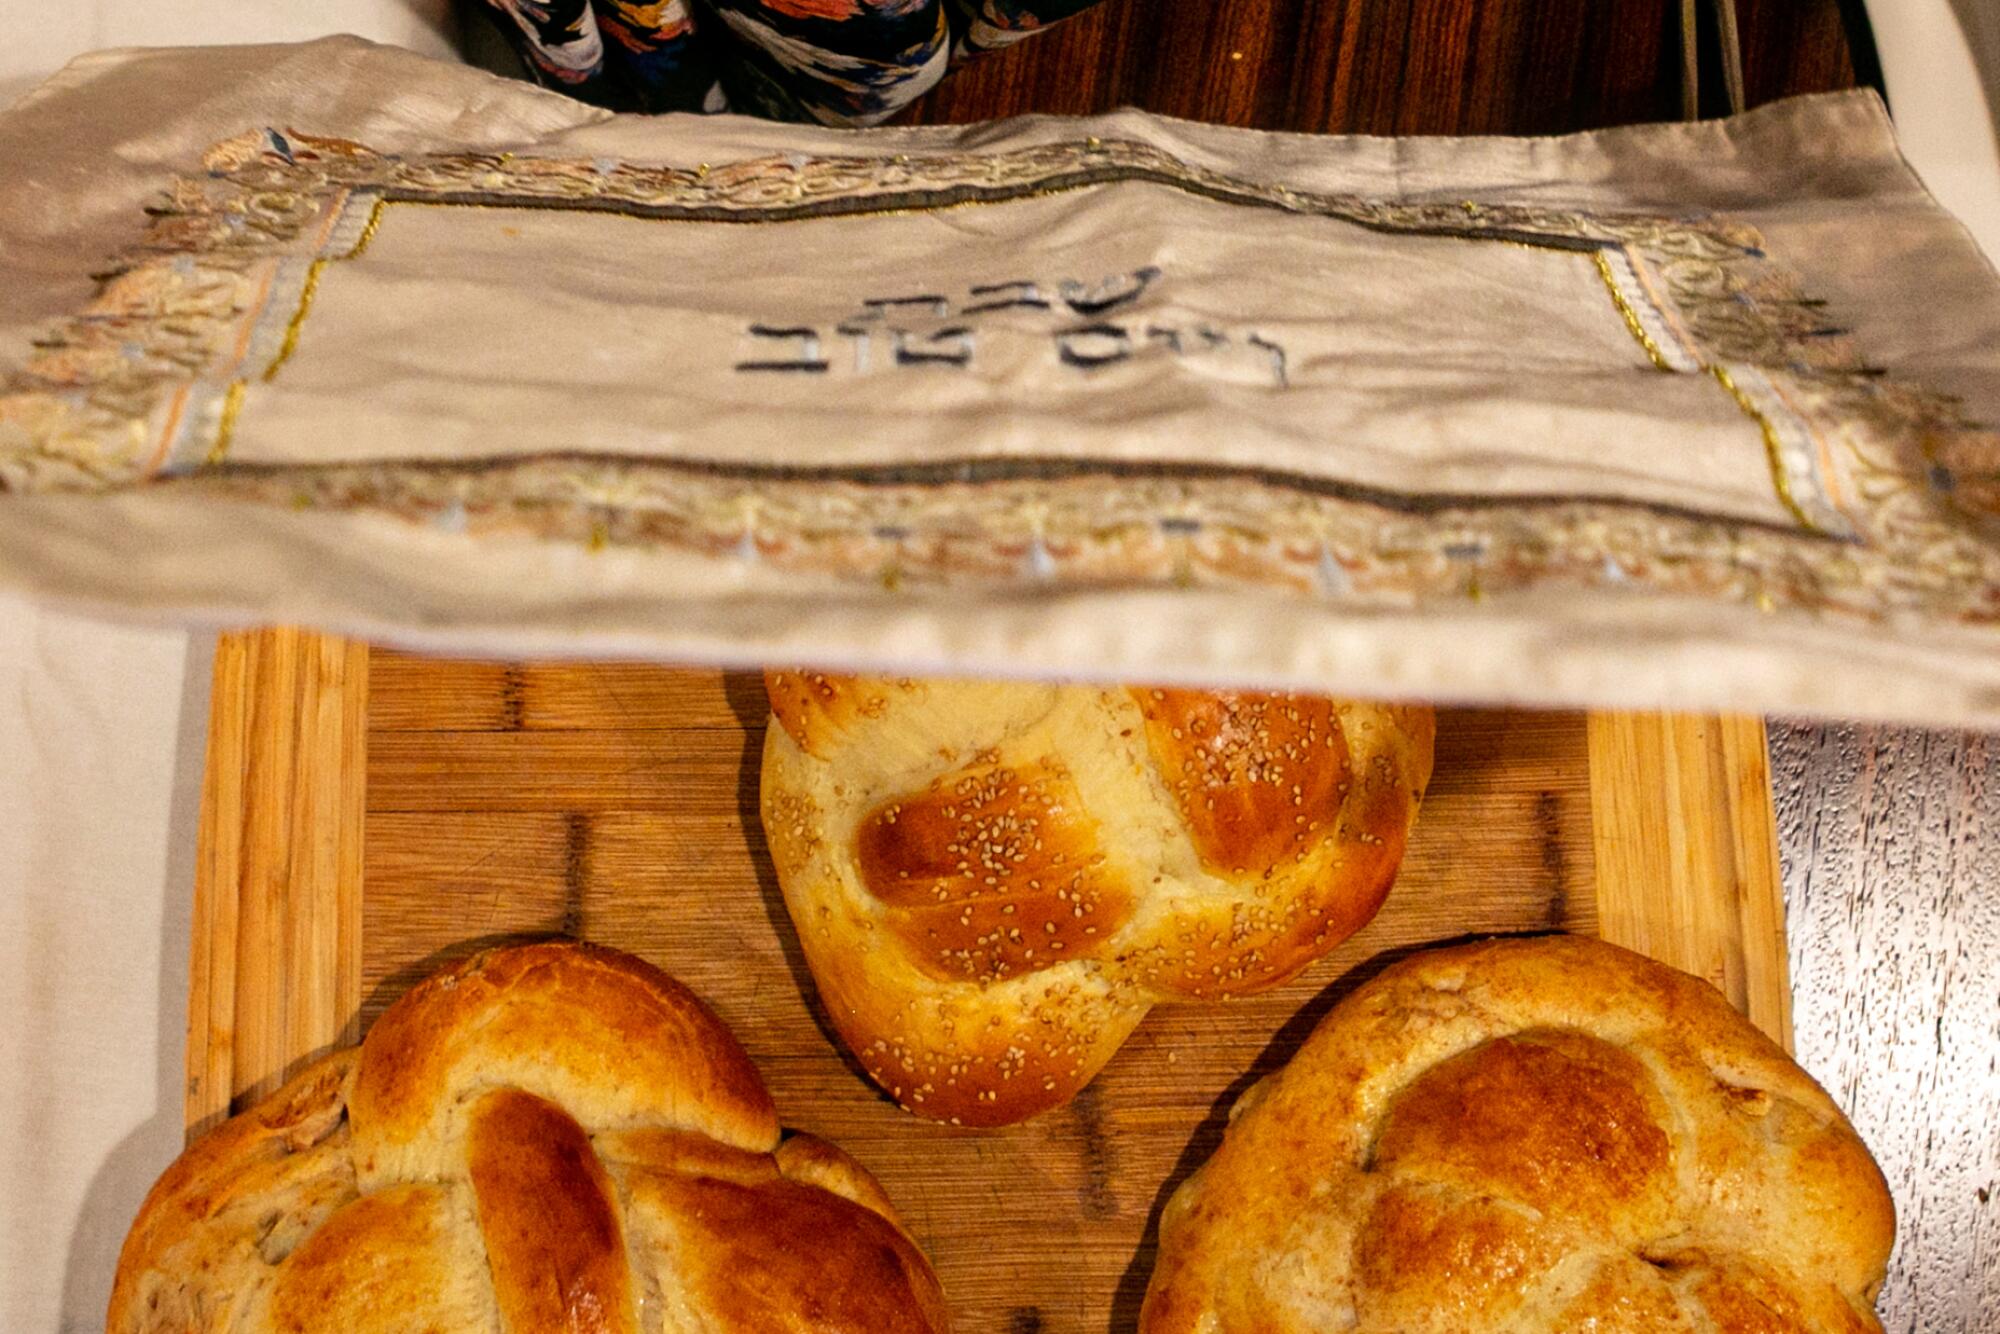 Instead of the usual long braid, challah bread is round for Rosh Hashanah.